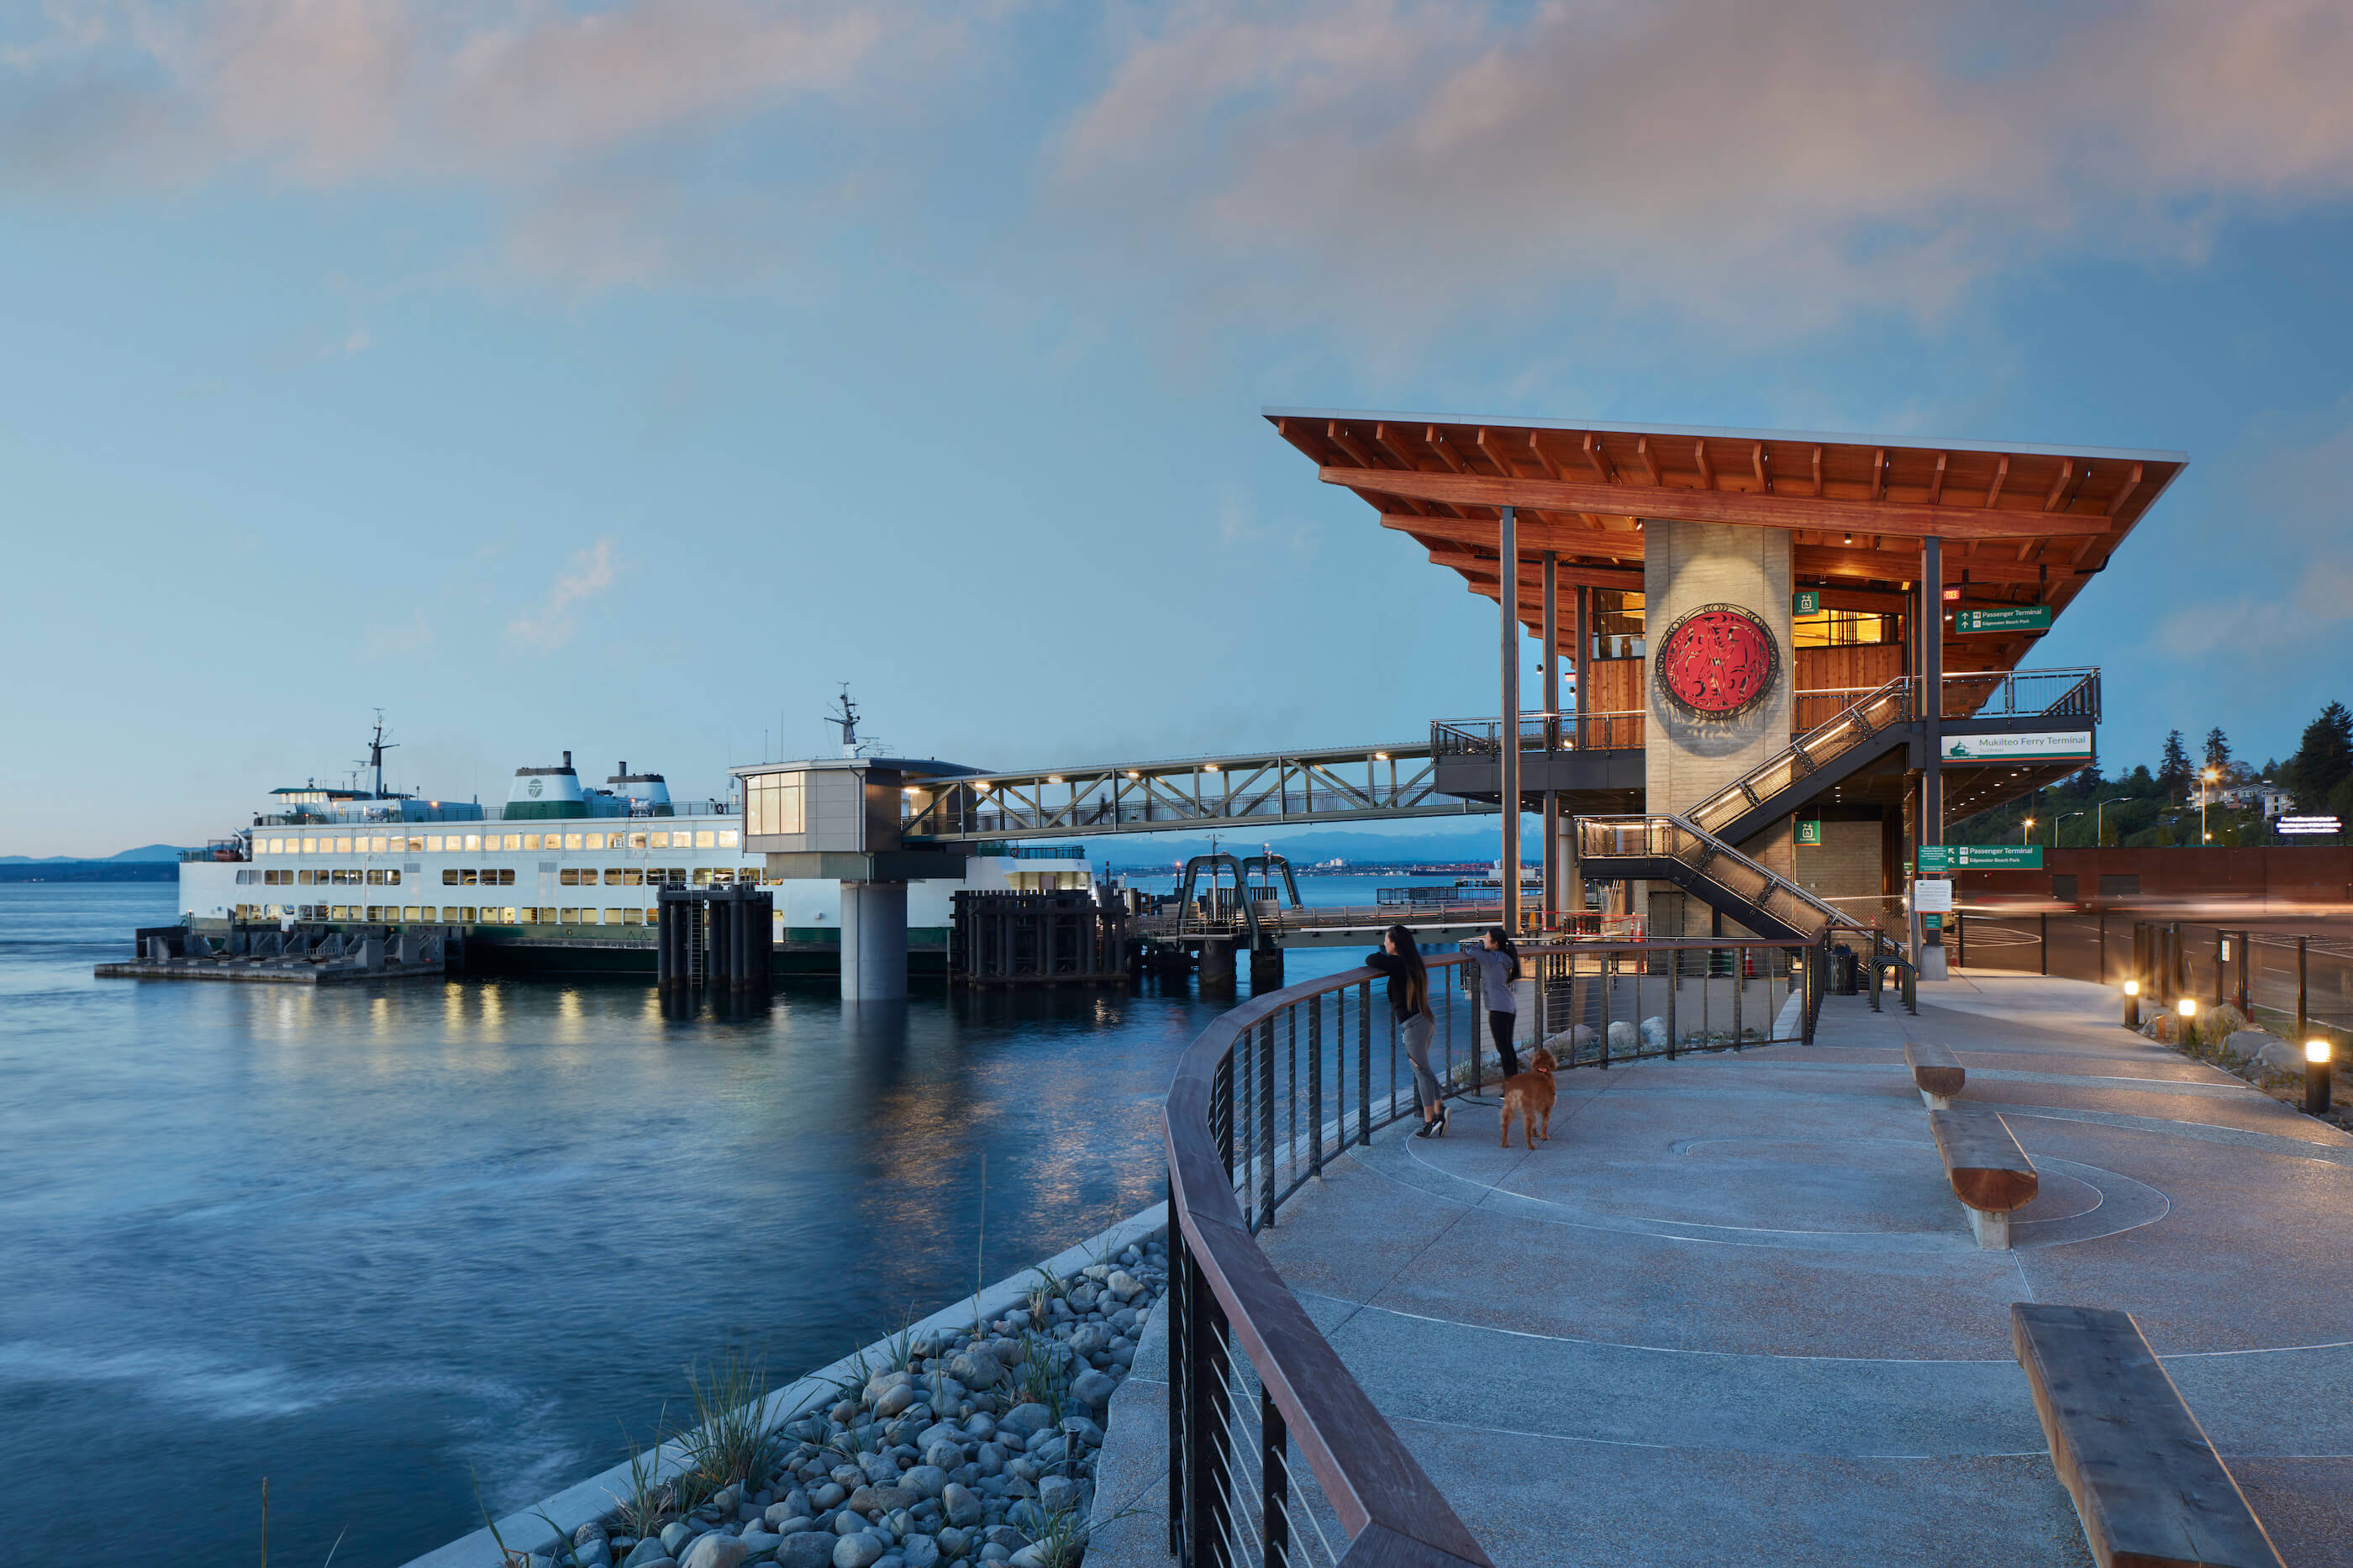 exterior view of a modern ferry terminal with native american motifs